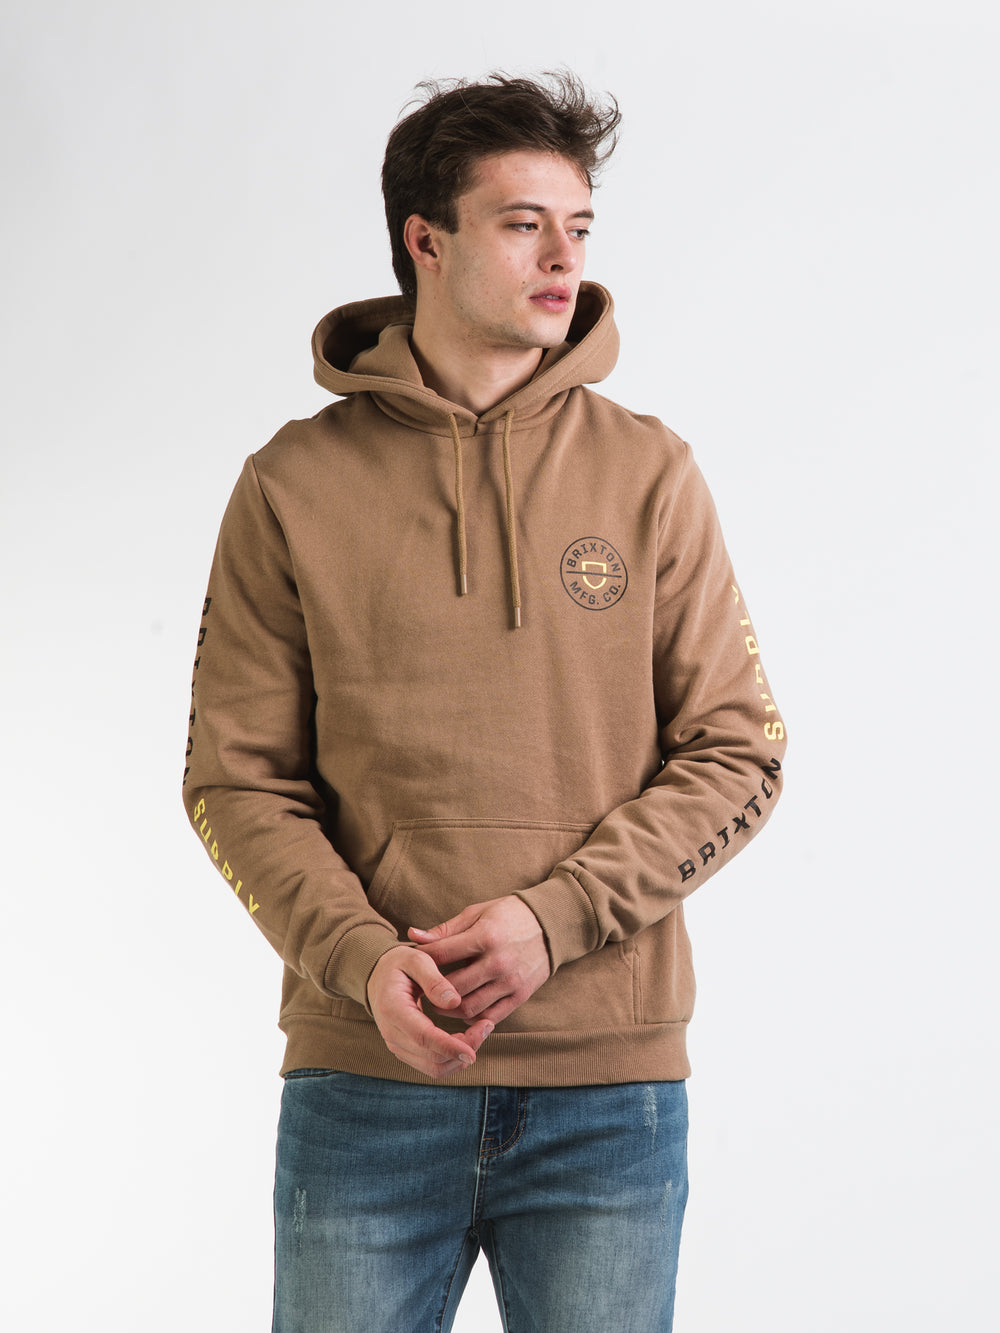 BRIXTON CREST PULL OVER HOODIE MOJAVE LIMELIGHT - CLEARANCE